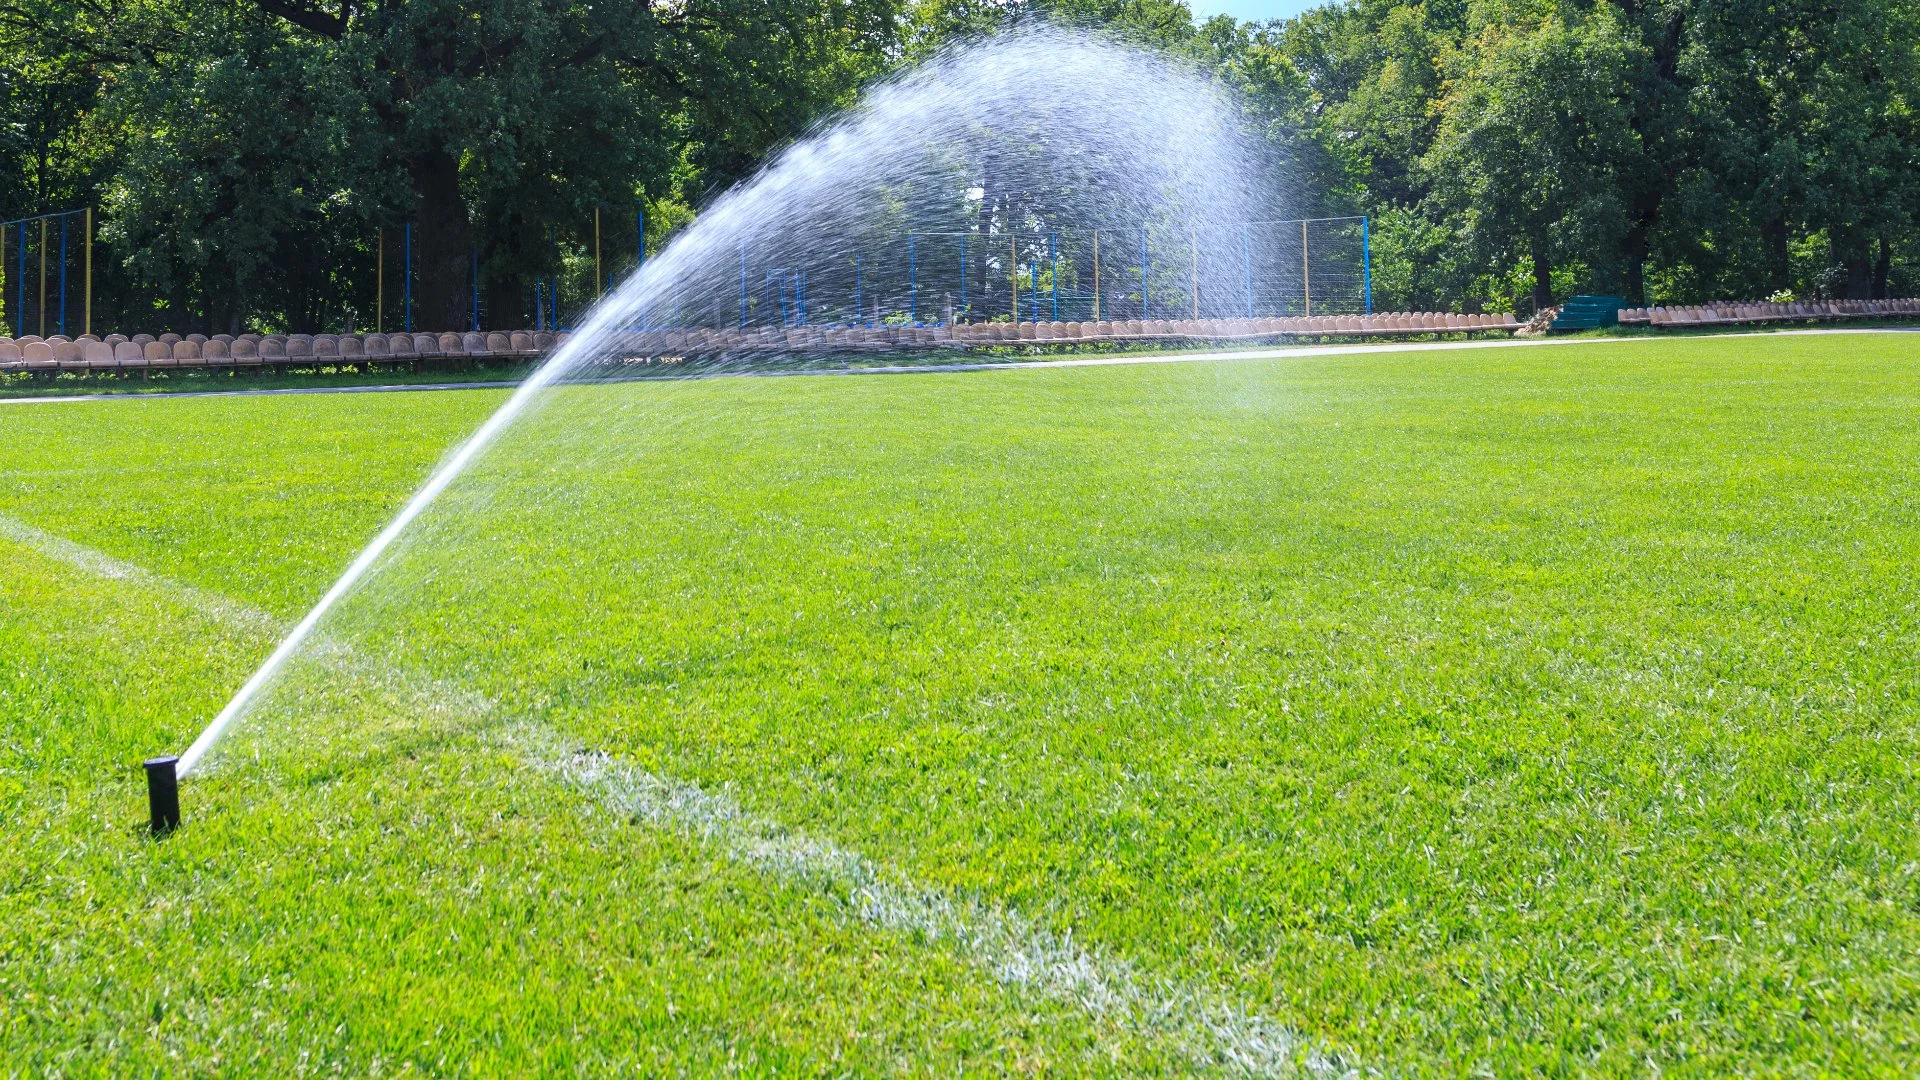 What’s the Best Way to Keep a Soccer Field Hydrated?